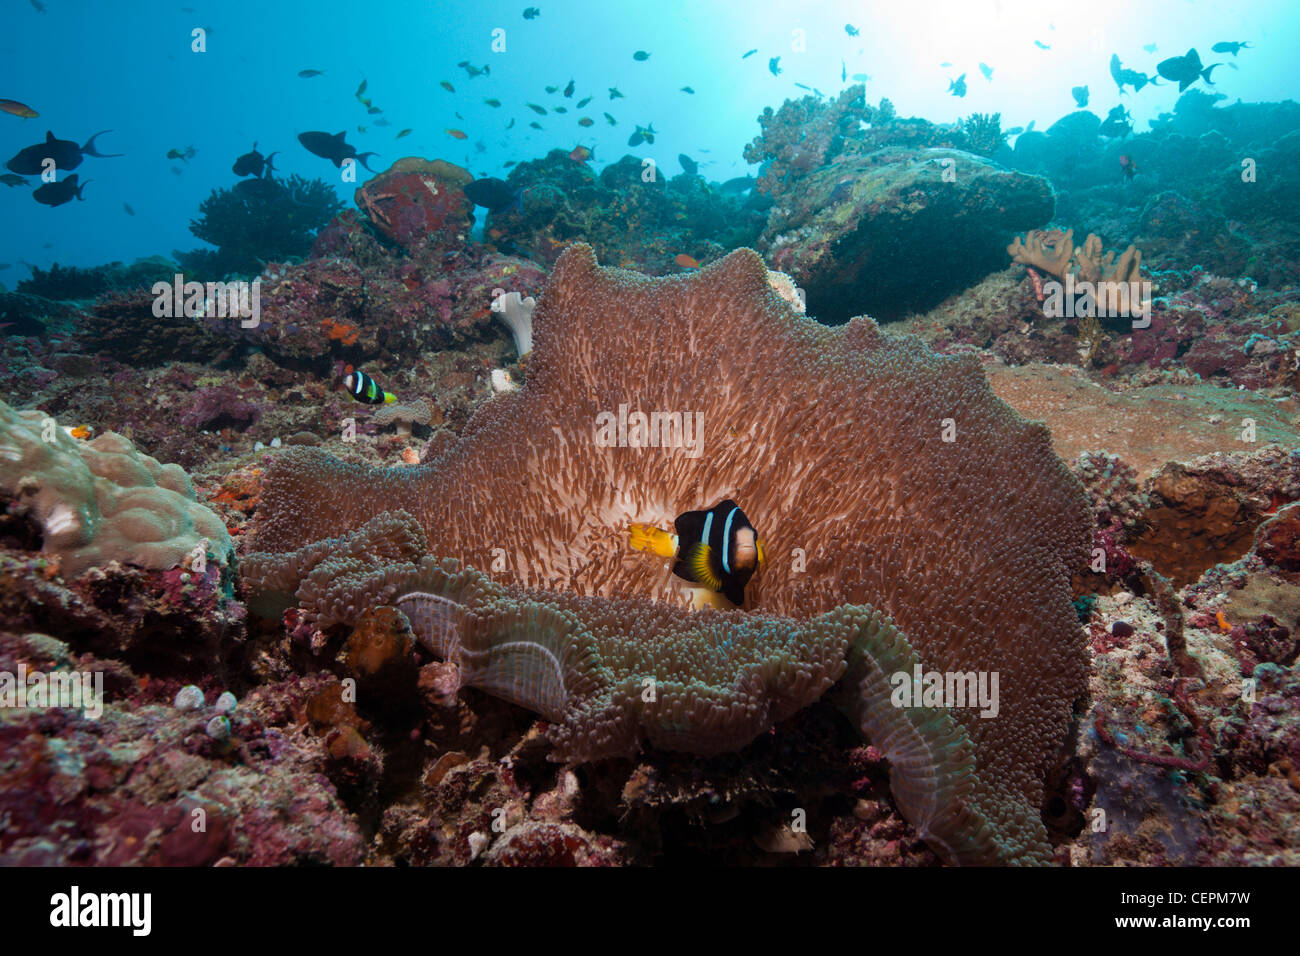 Orange-fin Anemonefish in Carpet Sea Anemone, Amphiprion chysopterus, Baa Atoll, Indian Ocean, Maldives Stock Photo